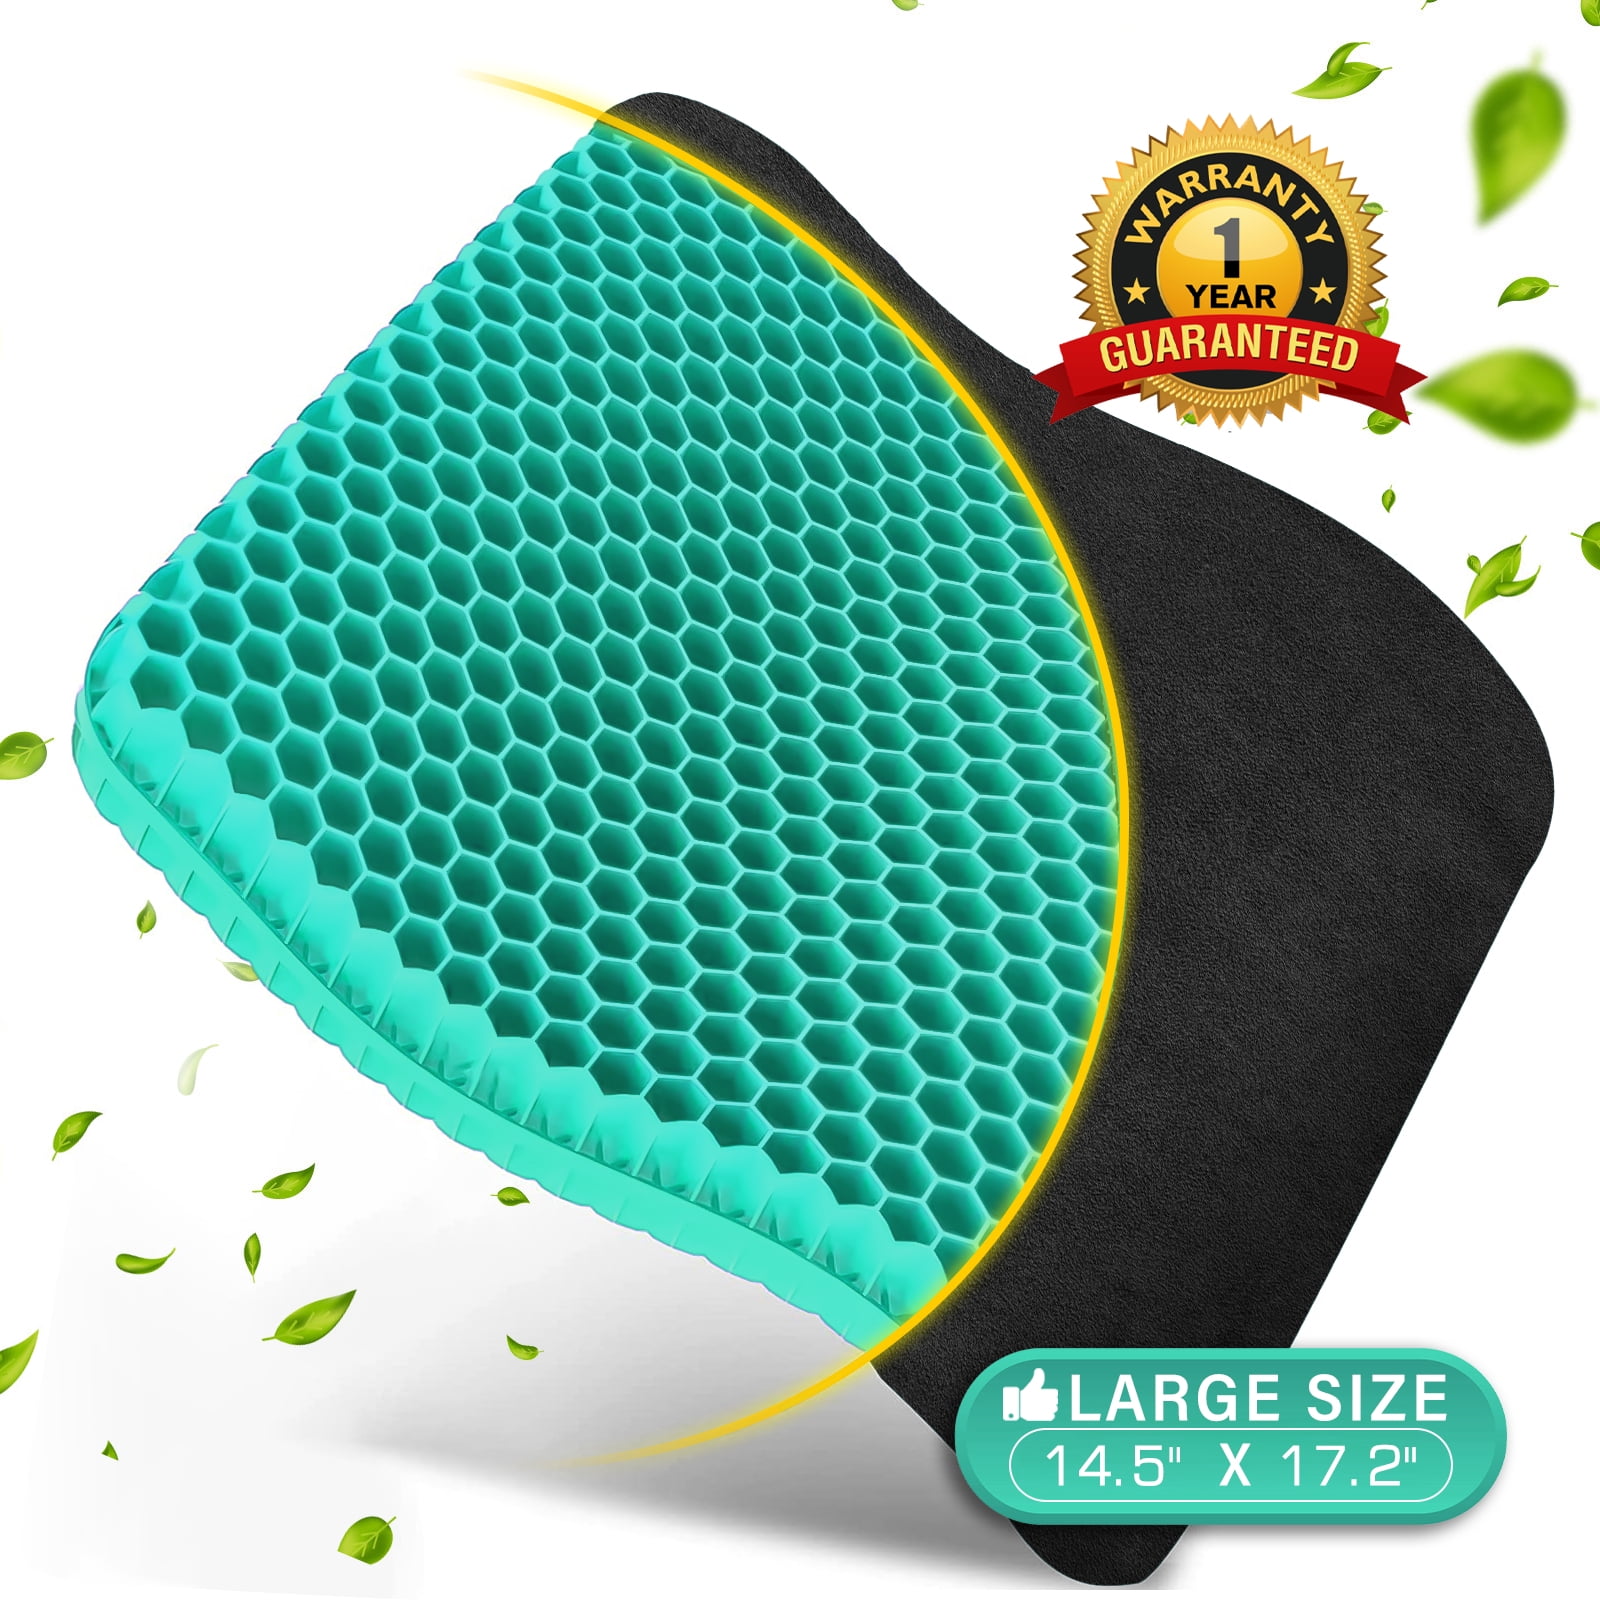 Gel cushion summer car seat cushion sedentary not tired butt pad office  chair pad summer cool pad cool square pad - AliExpress